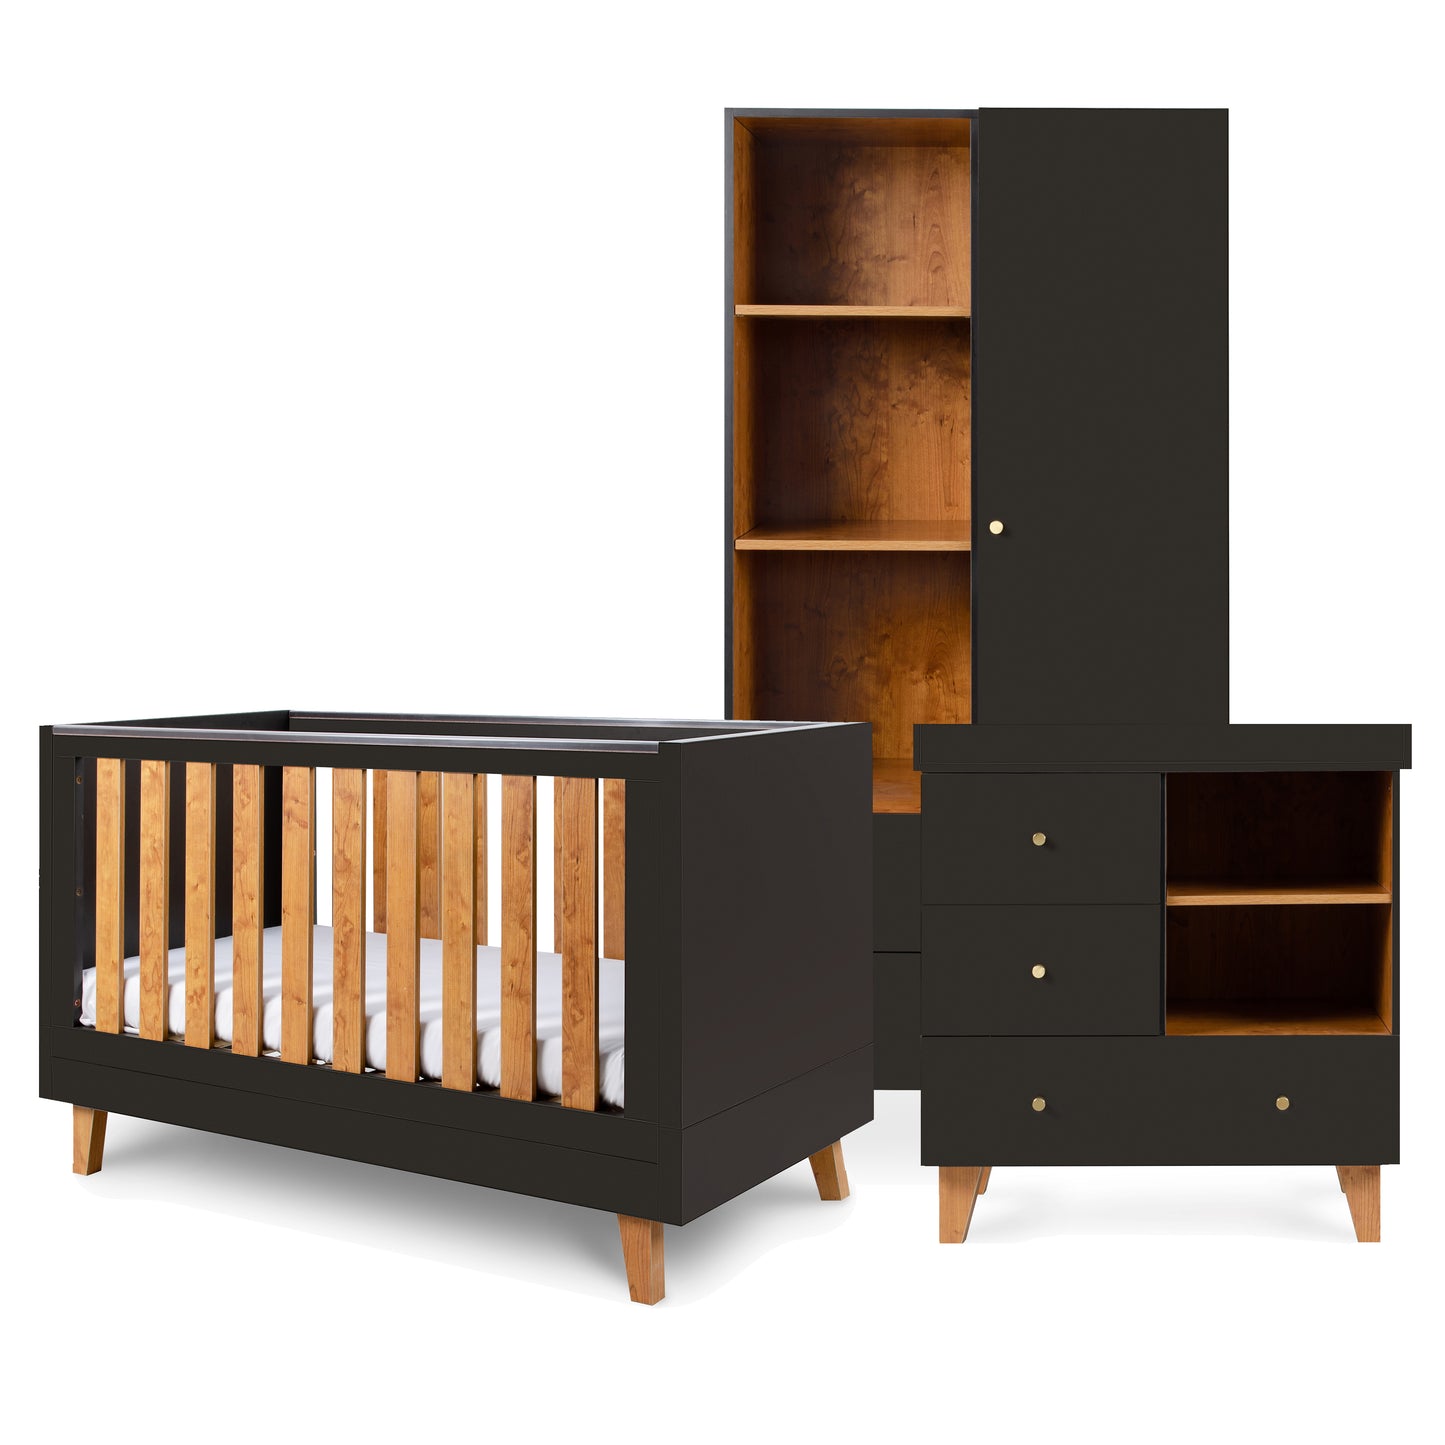 Tutti Bambini Como 3 Piece Range with Cot Bed, Dresser Changer and Wardrobe